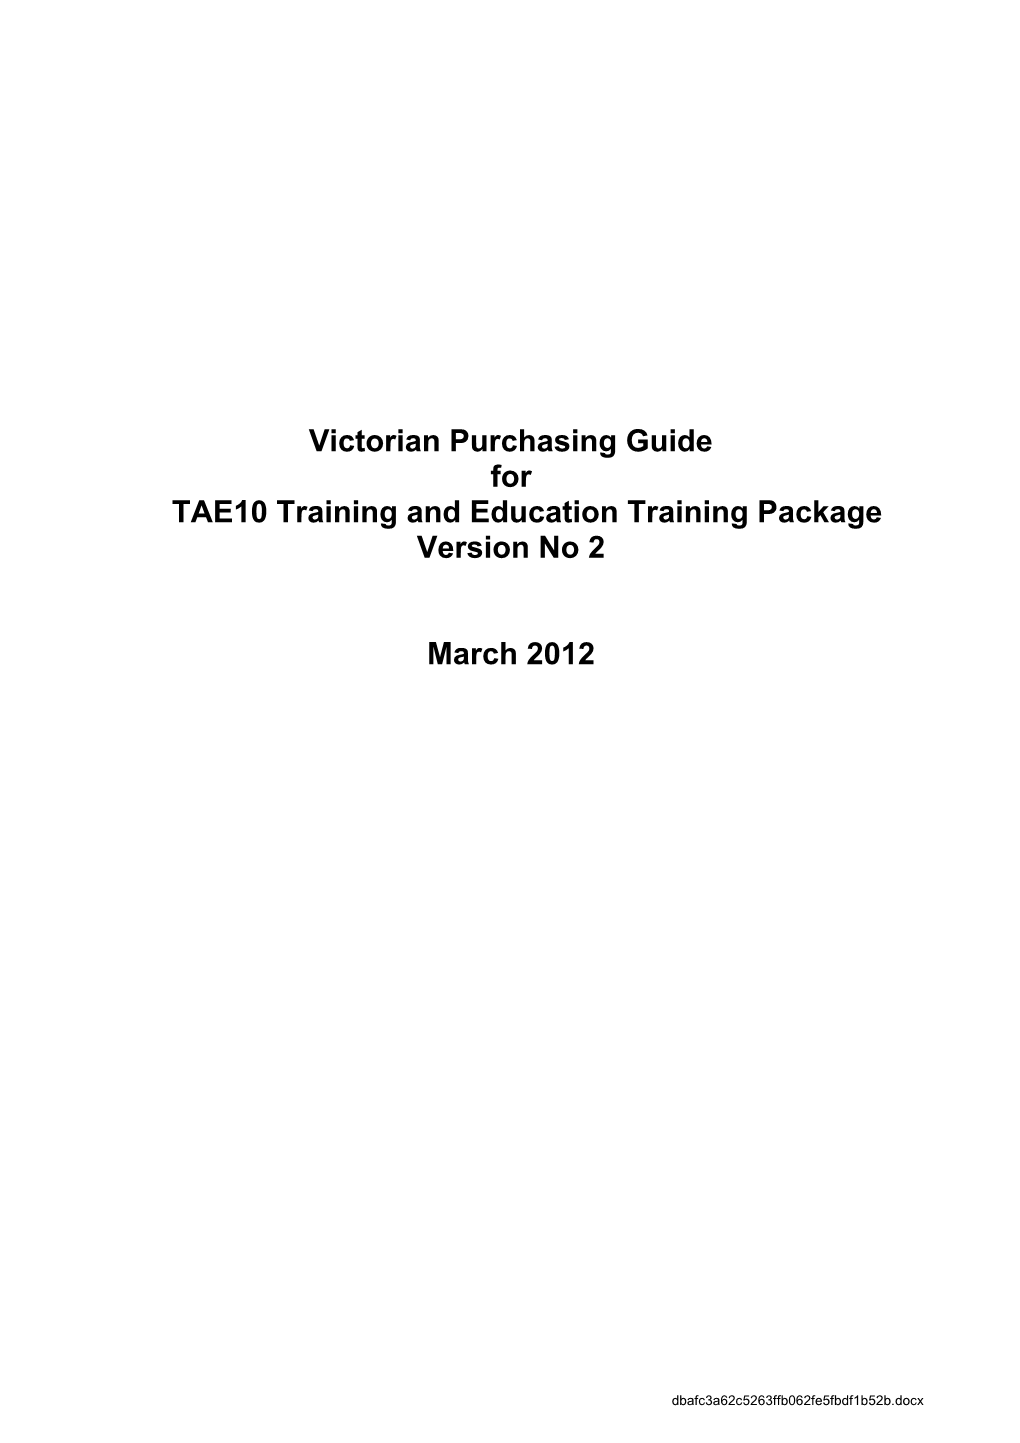 Victorian Purchasing Guide for TAE10 Training and Education Version 2